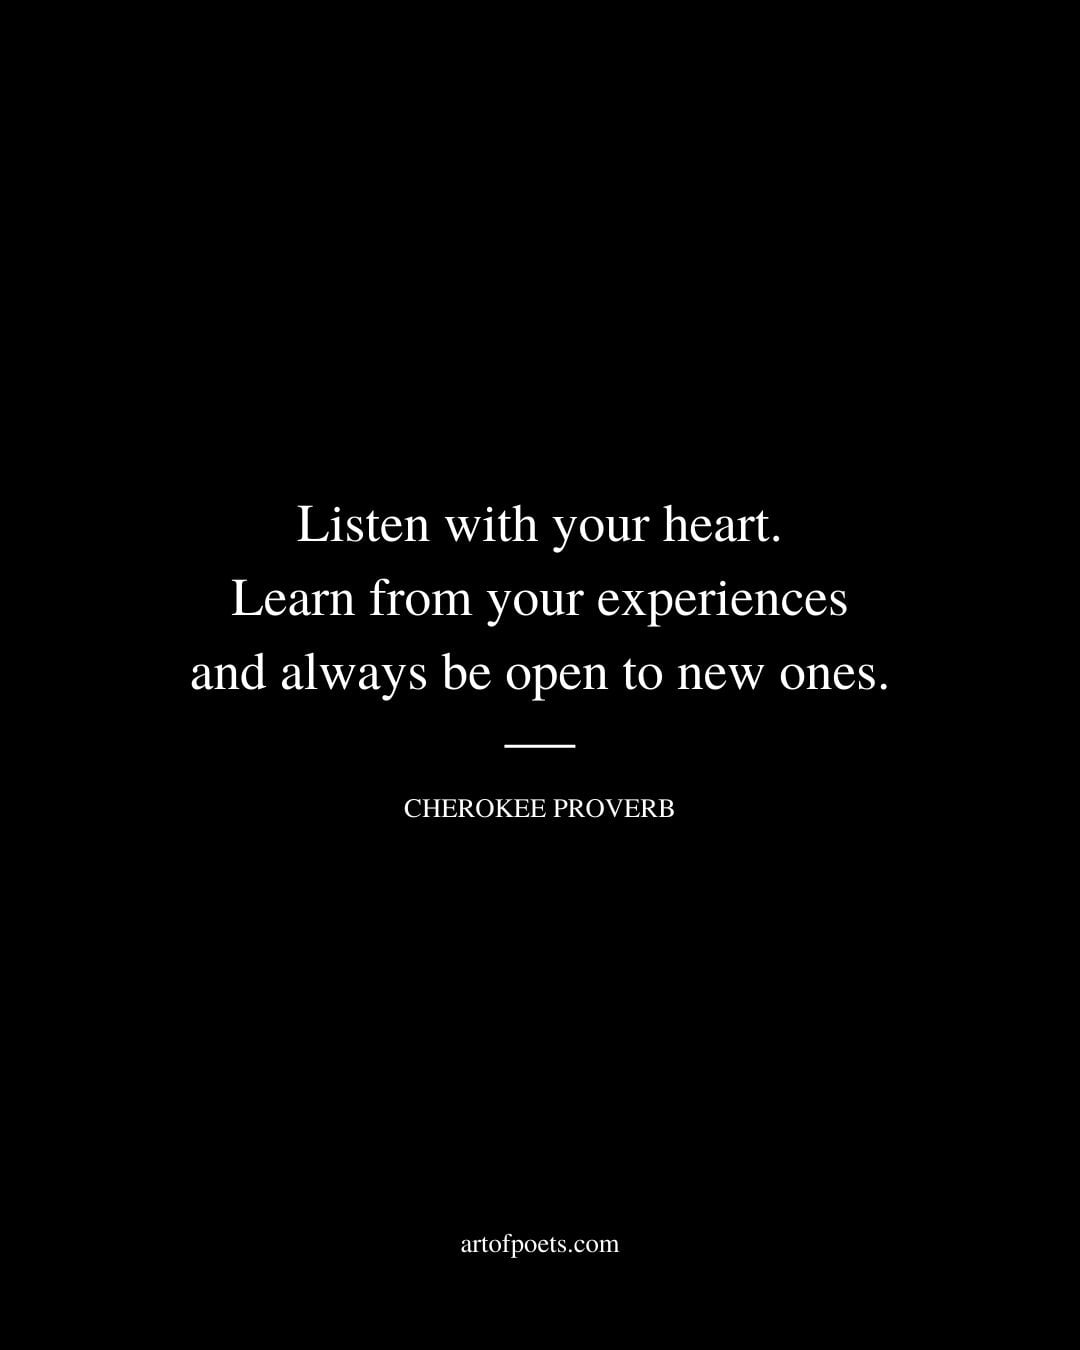 Listen with your heart. Learn from your experiences and always be open to new ones